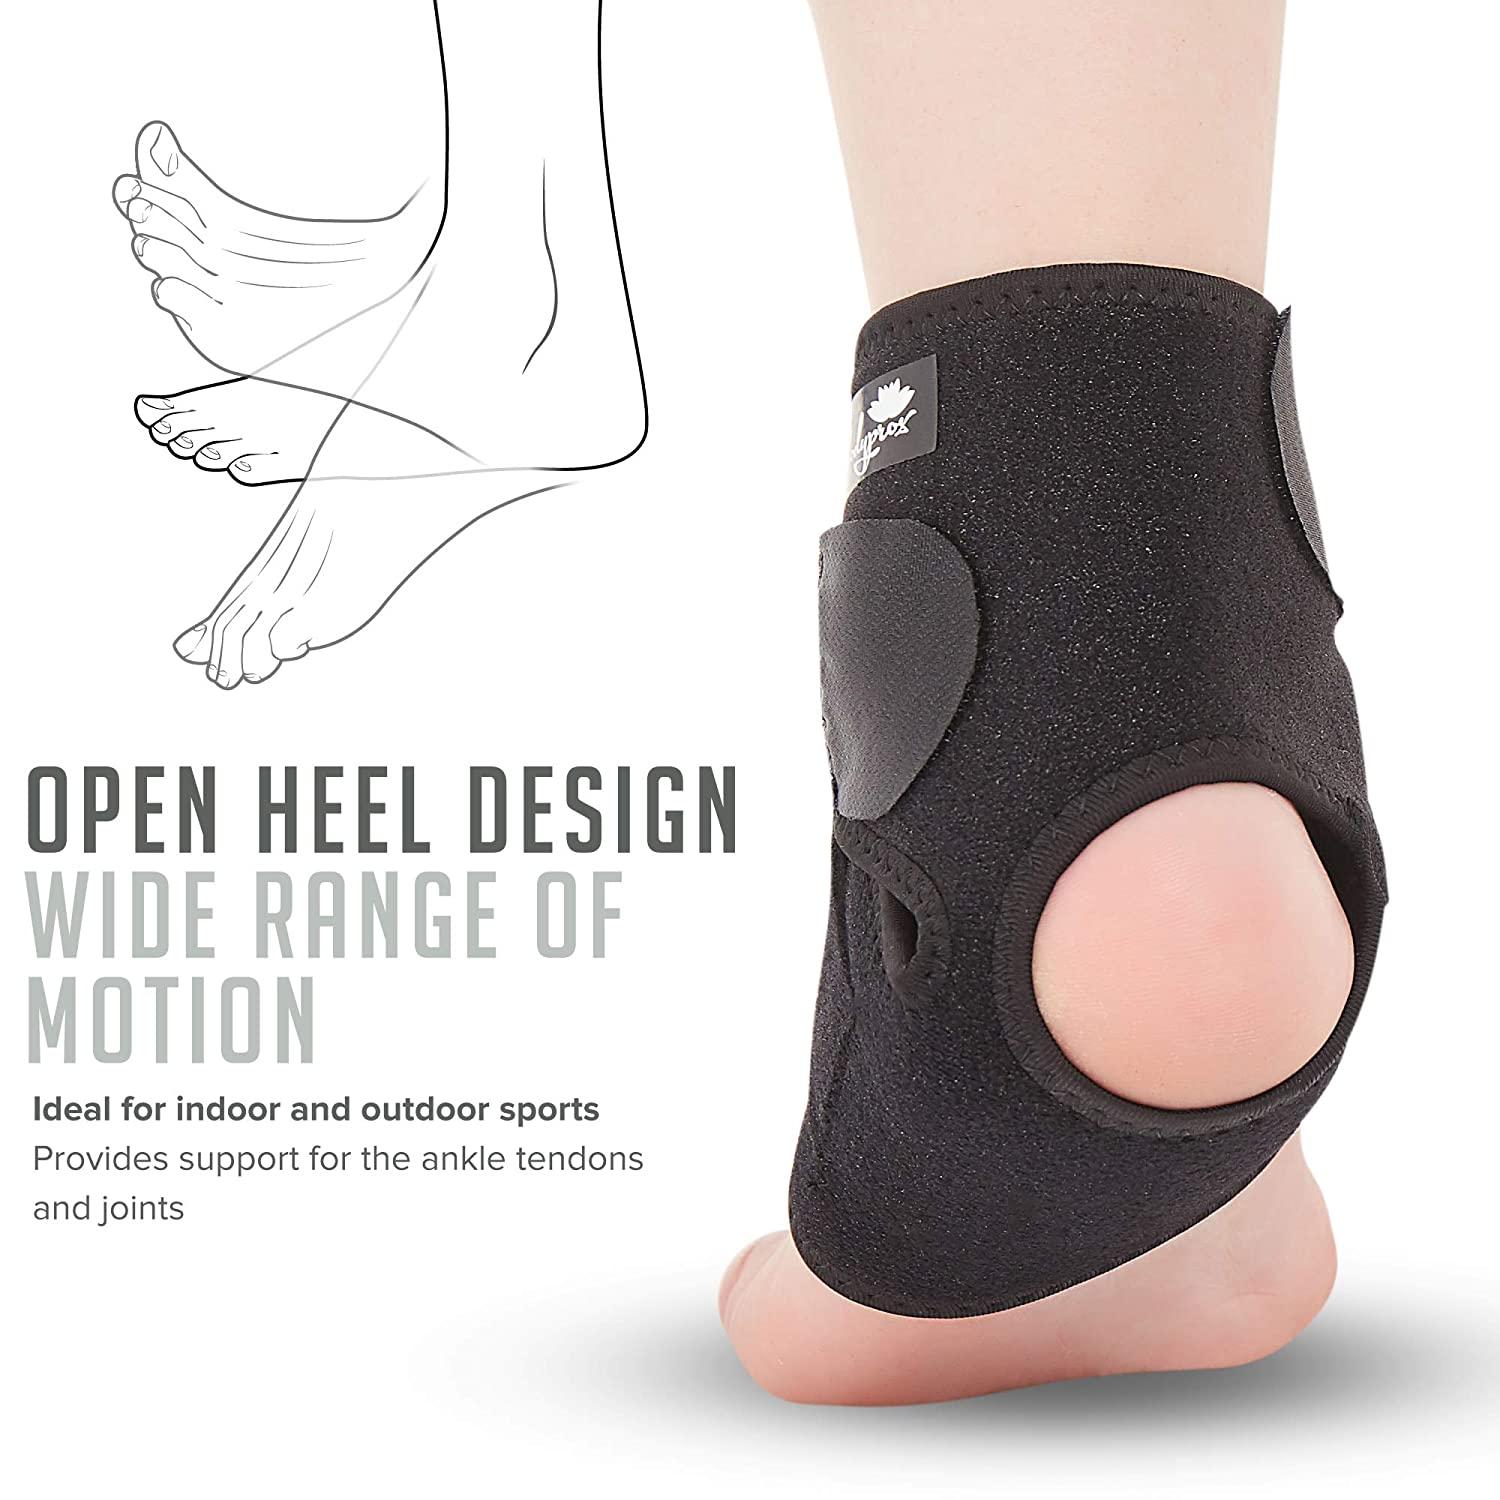 Uriel Open Heel Sleeve Ankle Support - FREE Shipping